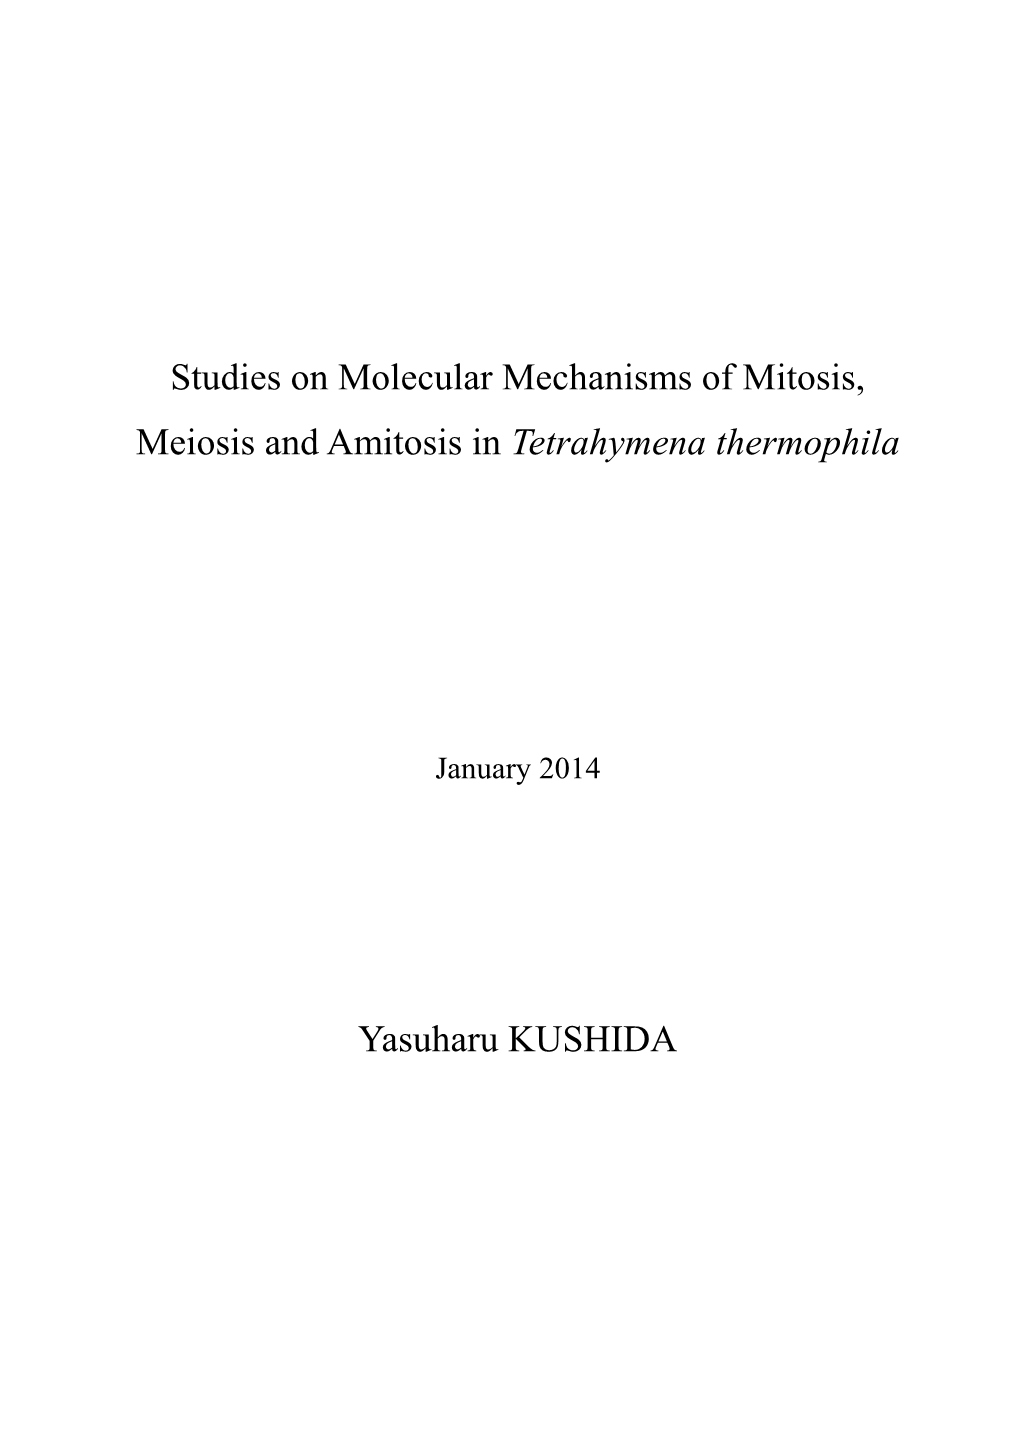 Studies on Molecular Mechanisms of Mitosis, Meiosis and Amitosis